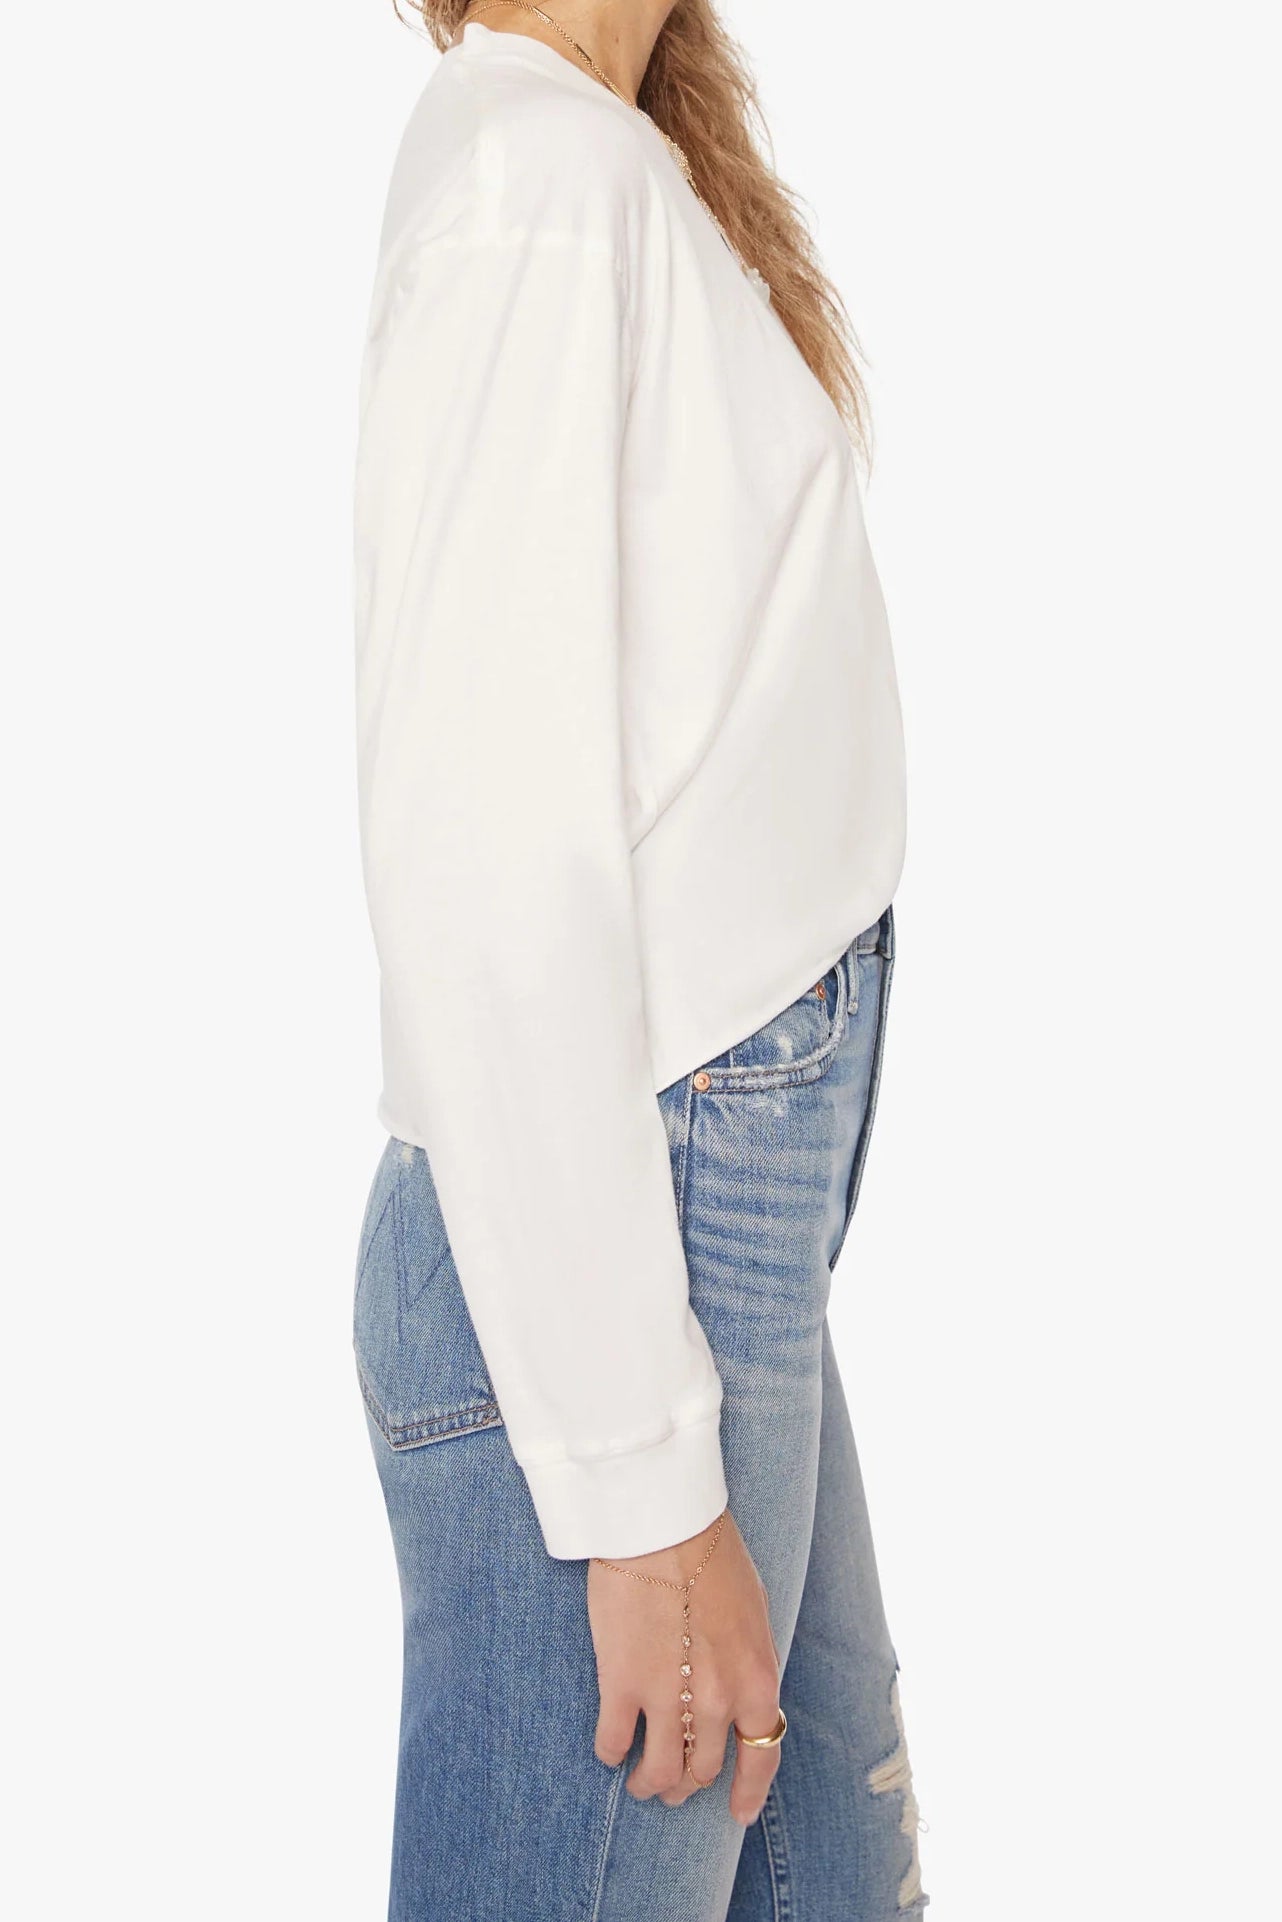 The Long Sleeve Slouchy Cut Off T-Shirts MOTHER   